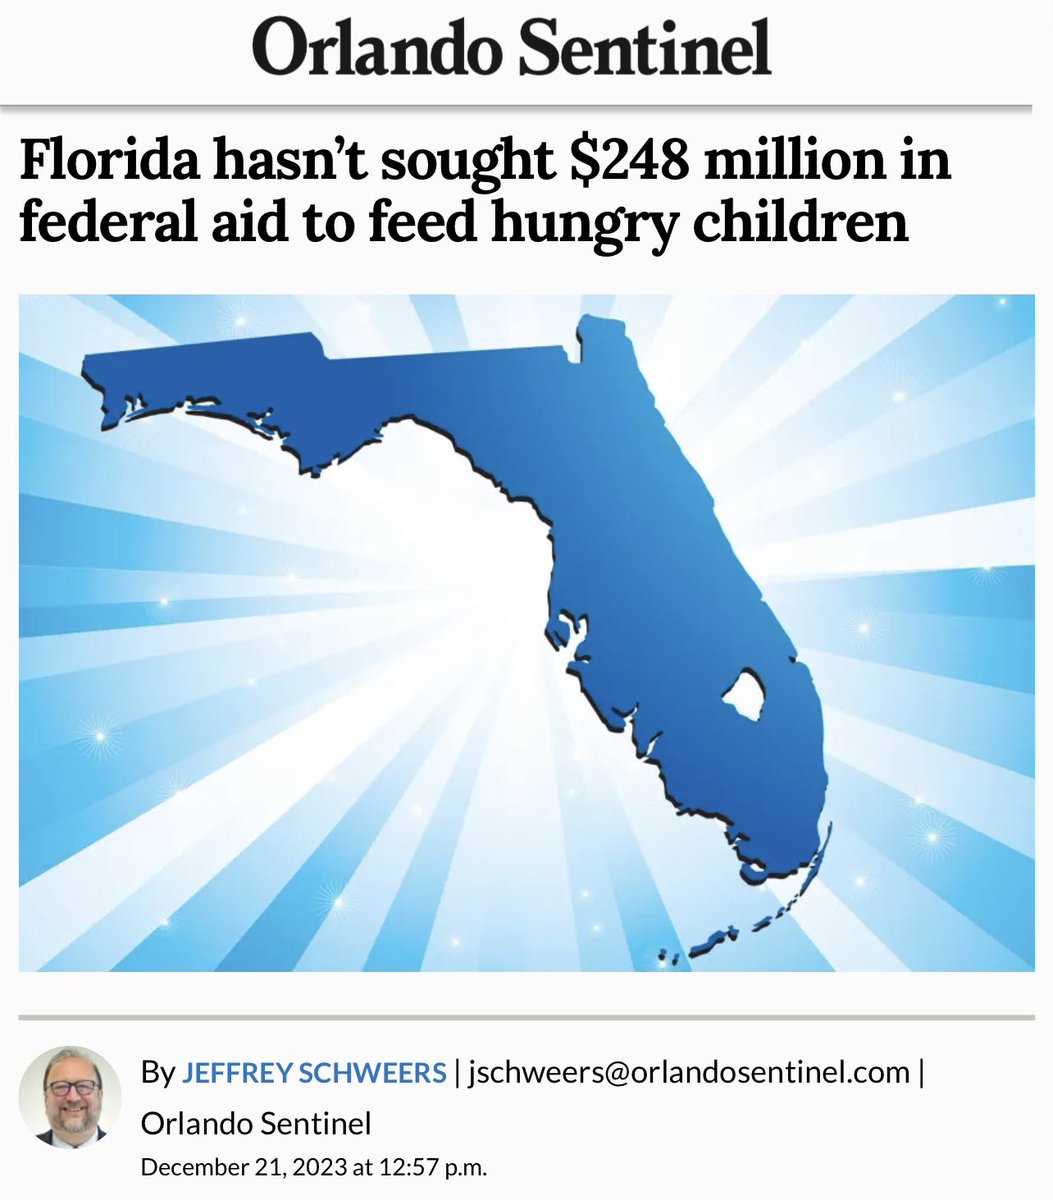 Either Ron DeSantis thinks feeding hungry children is too “woke” OR he’s too busy pushing his failed presidential campaign to care. Either way, this is a total disgrace. Florida children deserve better.